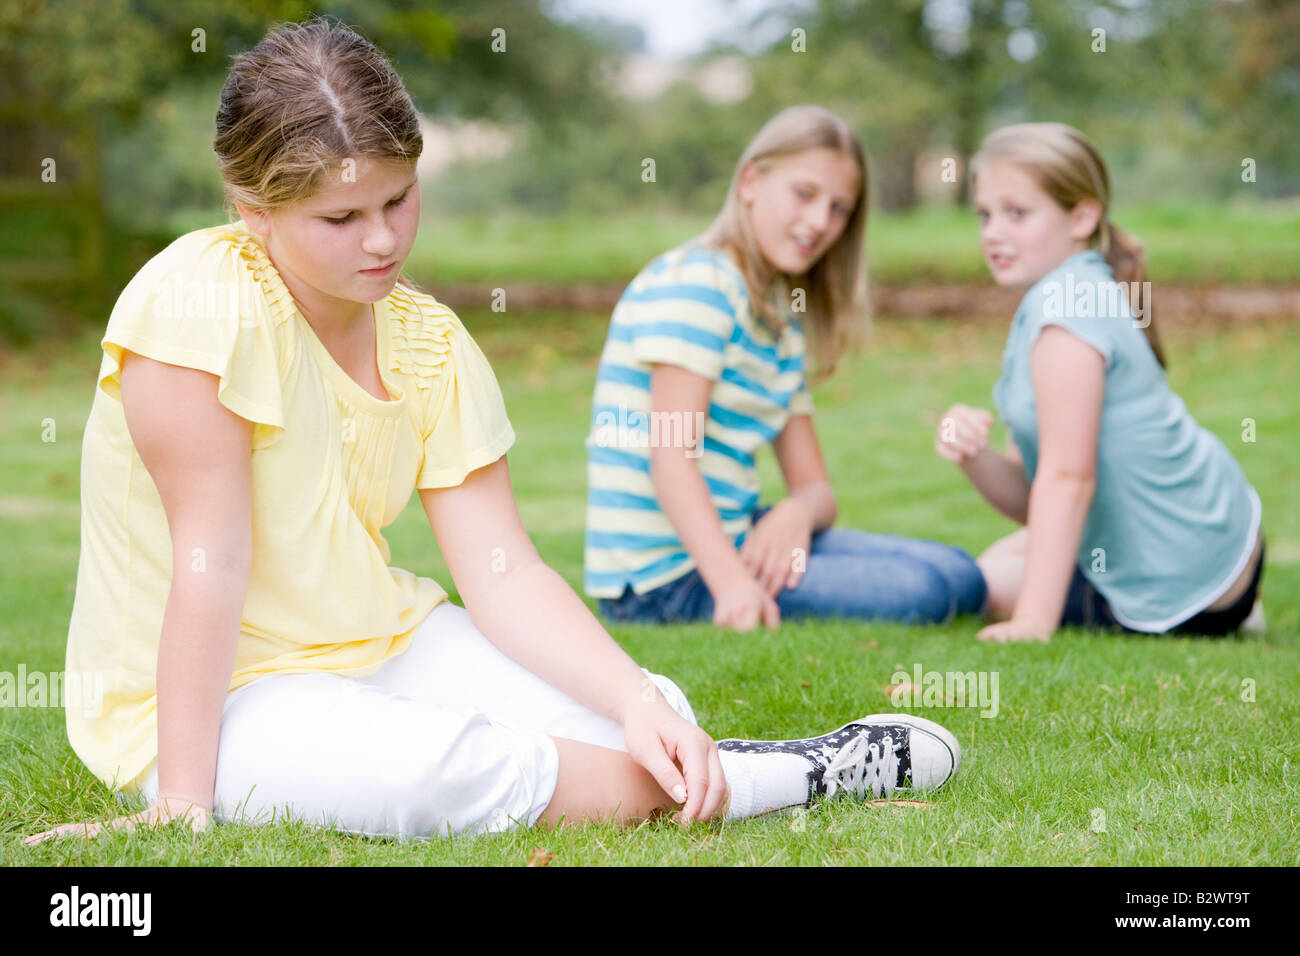 Two young girls bullying other young girl outdoors Stock Photo